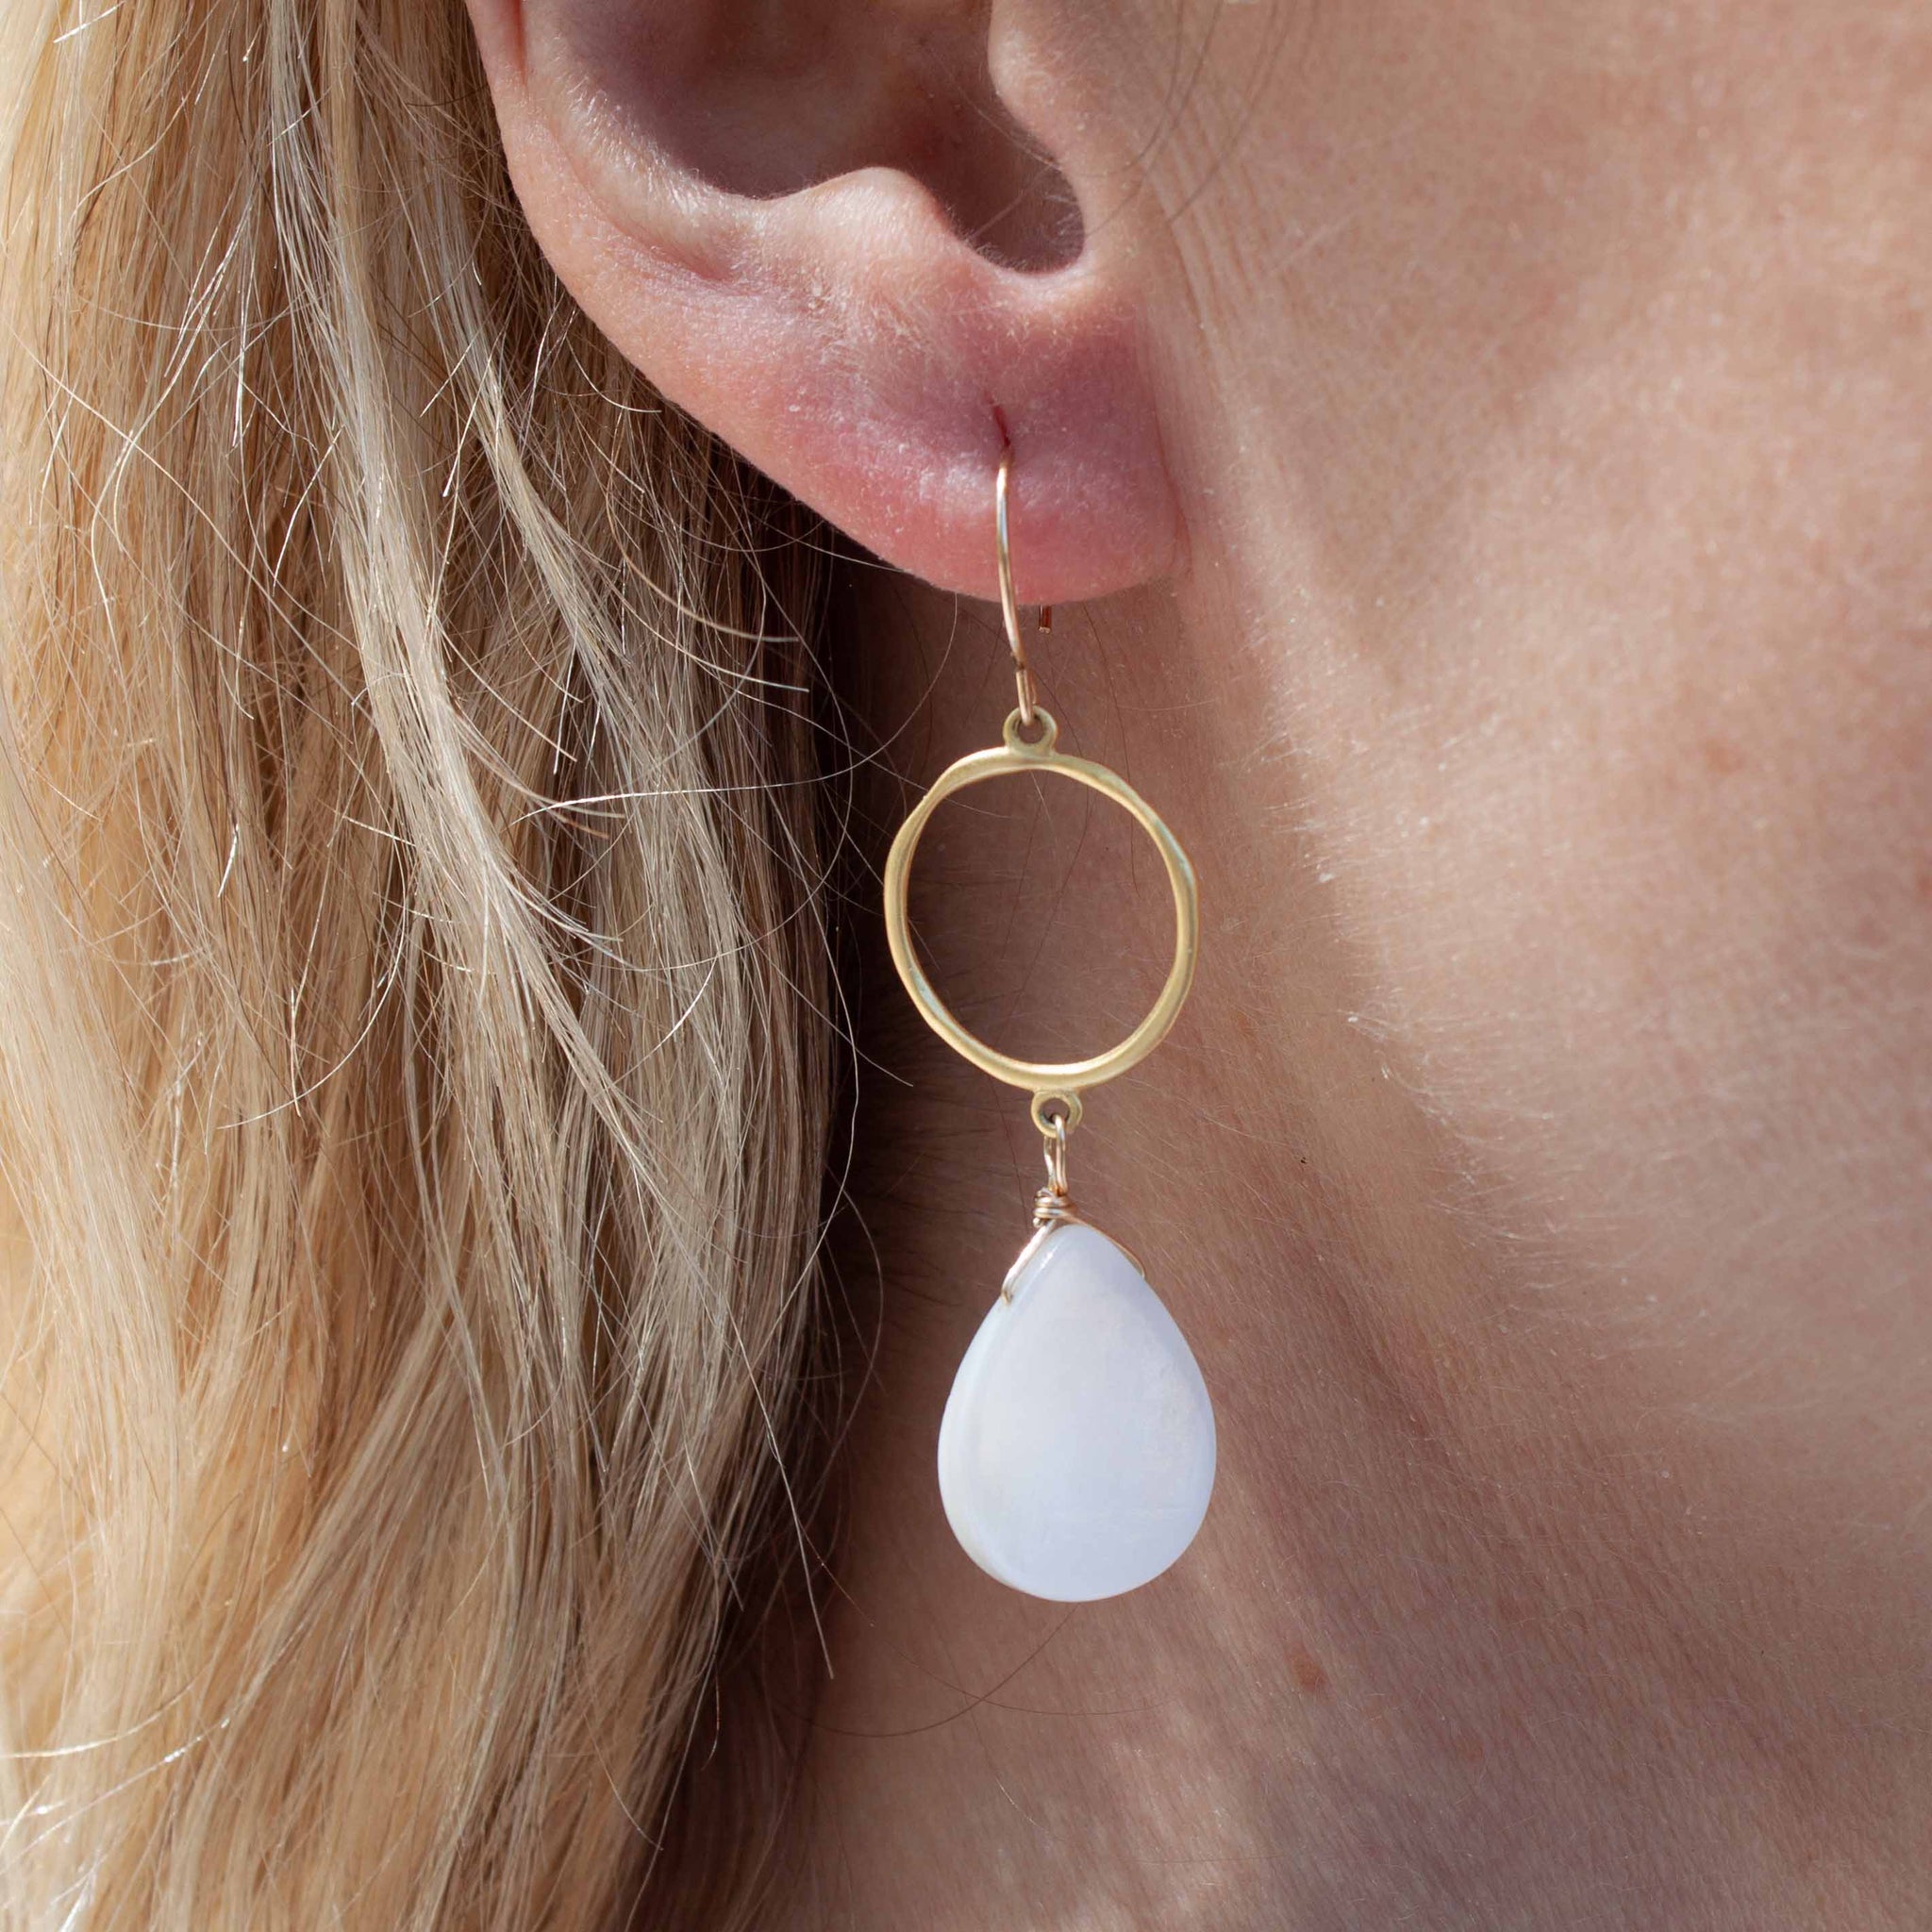 If we can't go tot he beach (yet!), let's at least feel like we're there! Put on these luscious shell earrings, crush yourself some mint and enjoy a mojito!  2" meringue shell earrings with gold vermeil circle charm and gold filled earrings hooks. Made in Toronto by kp jewelry co.